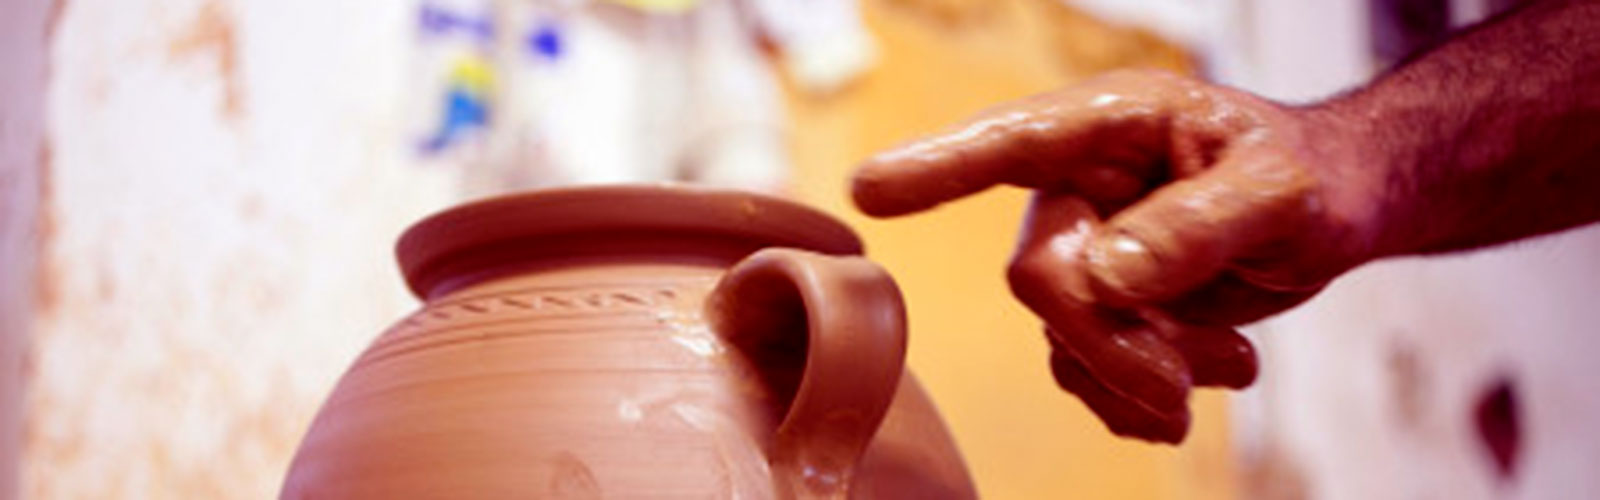 The process of making a ceramic object